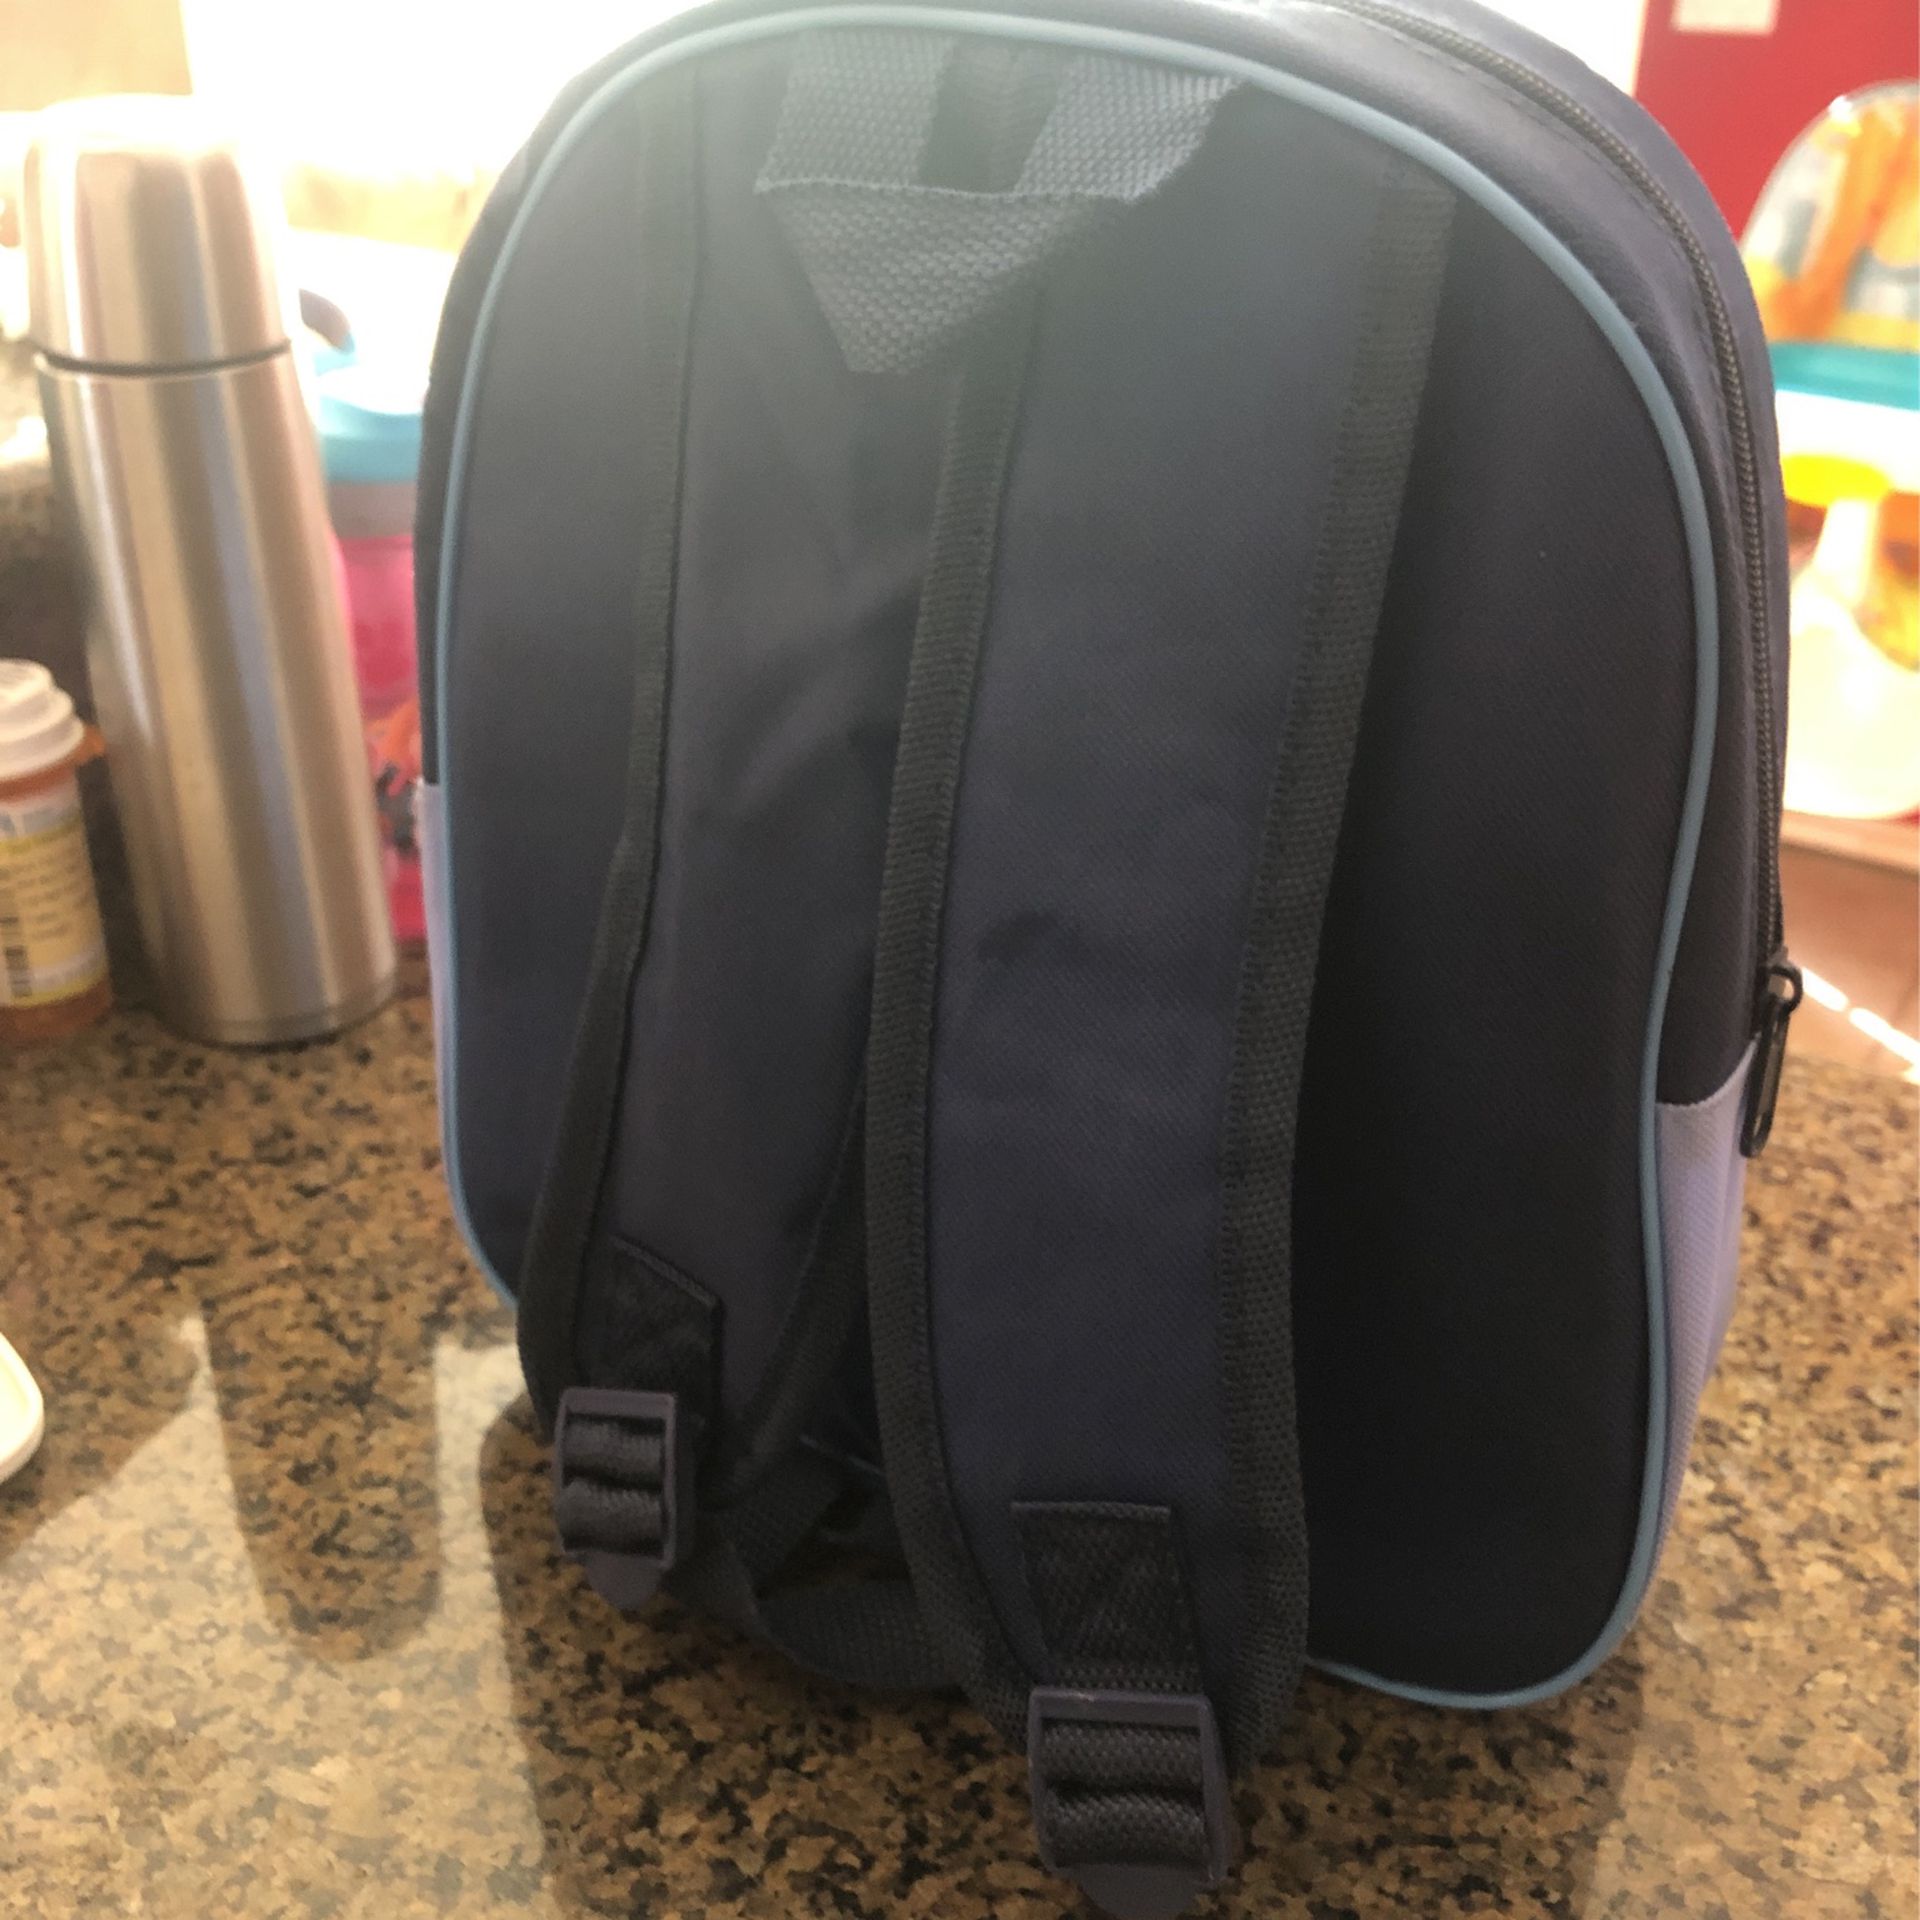 Backpack With Coloring Supplies